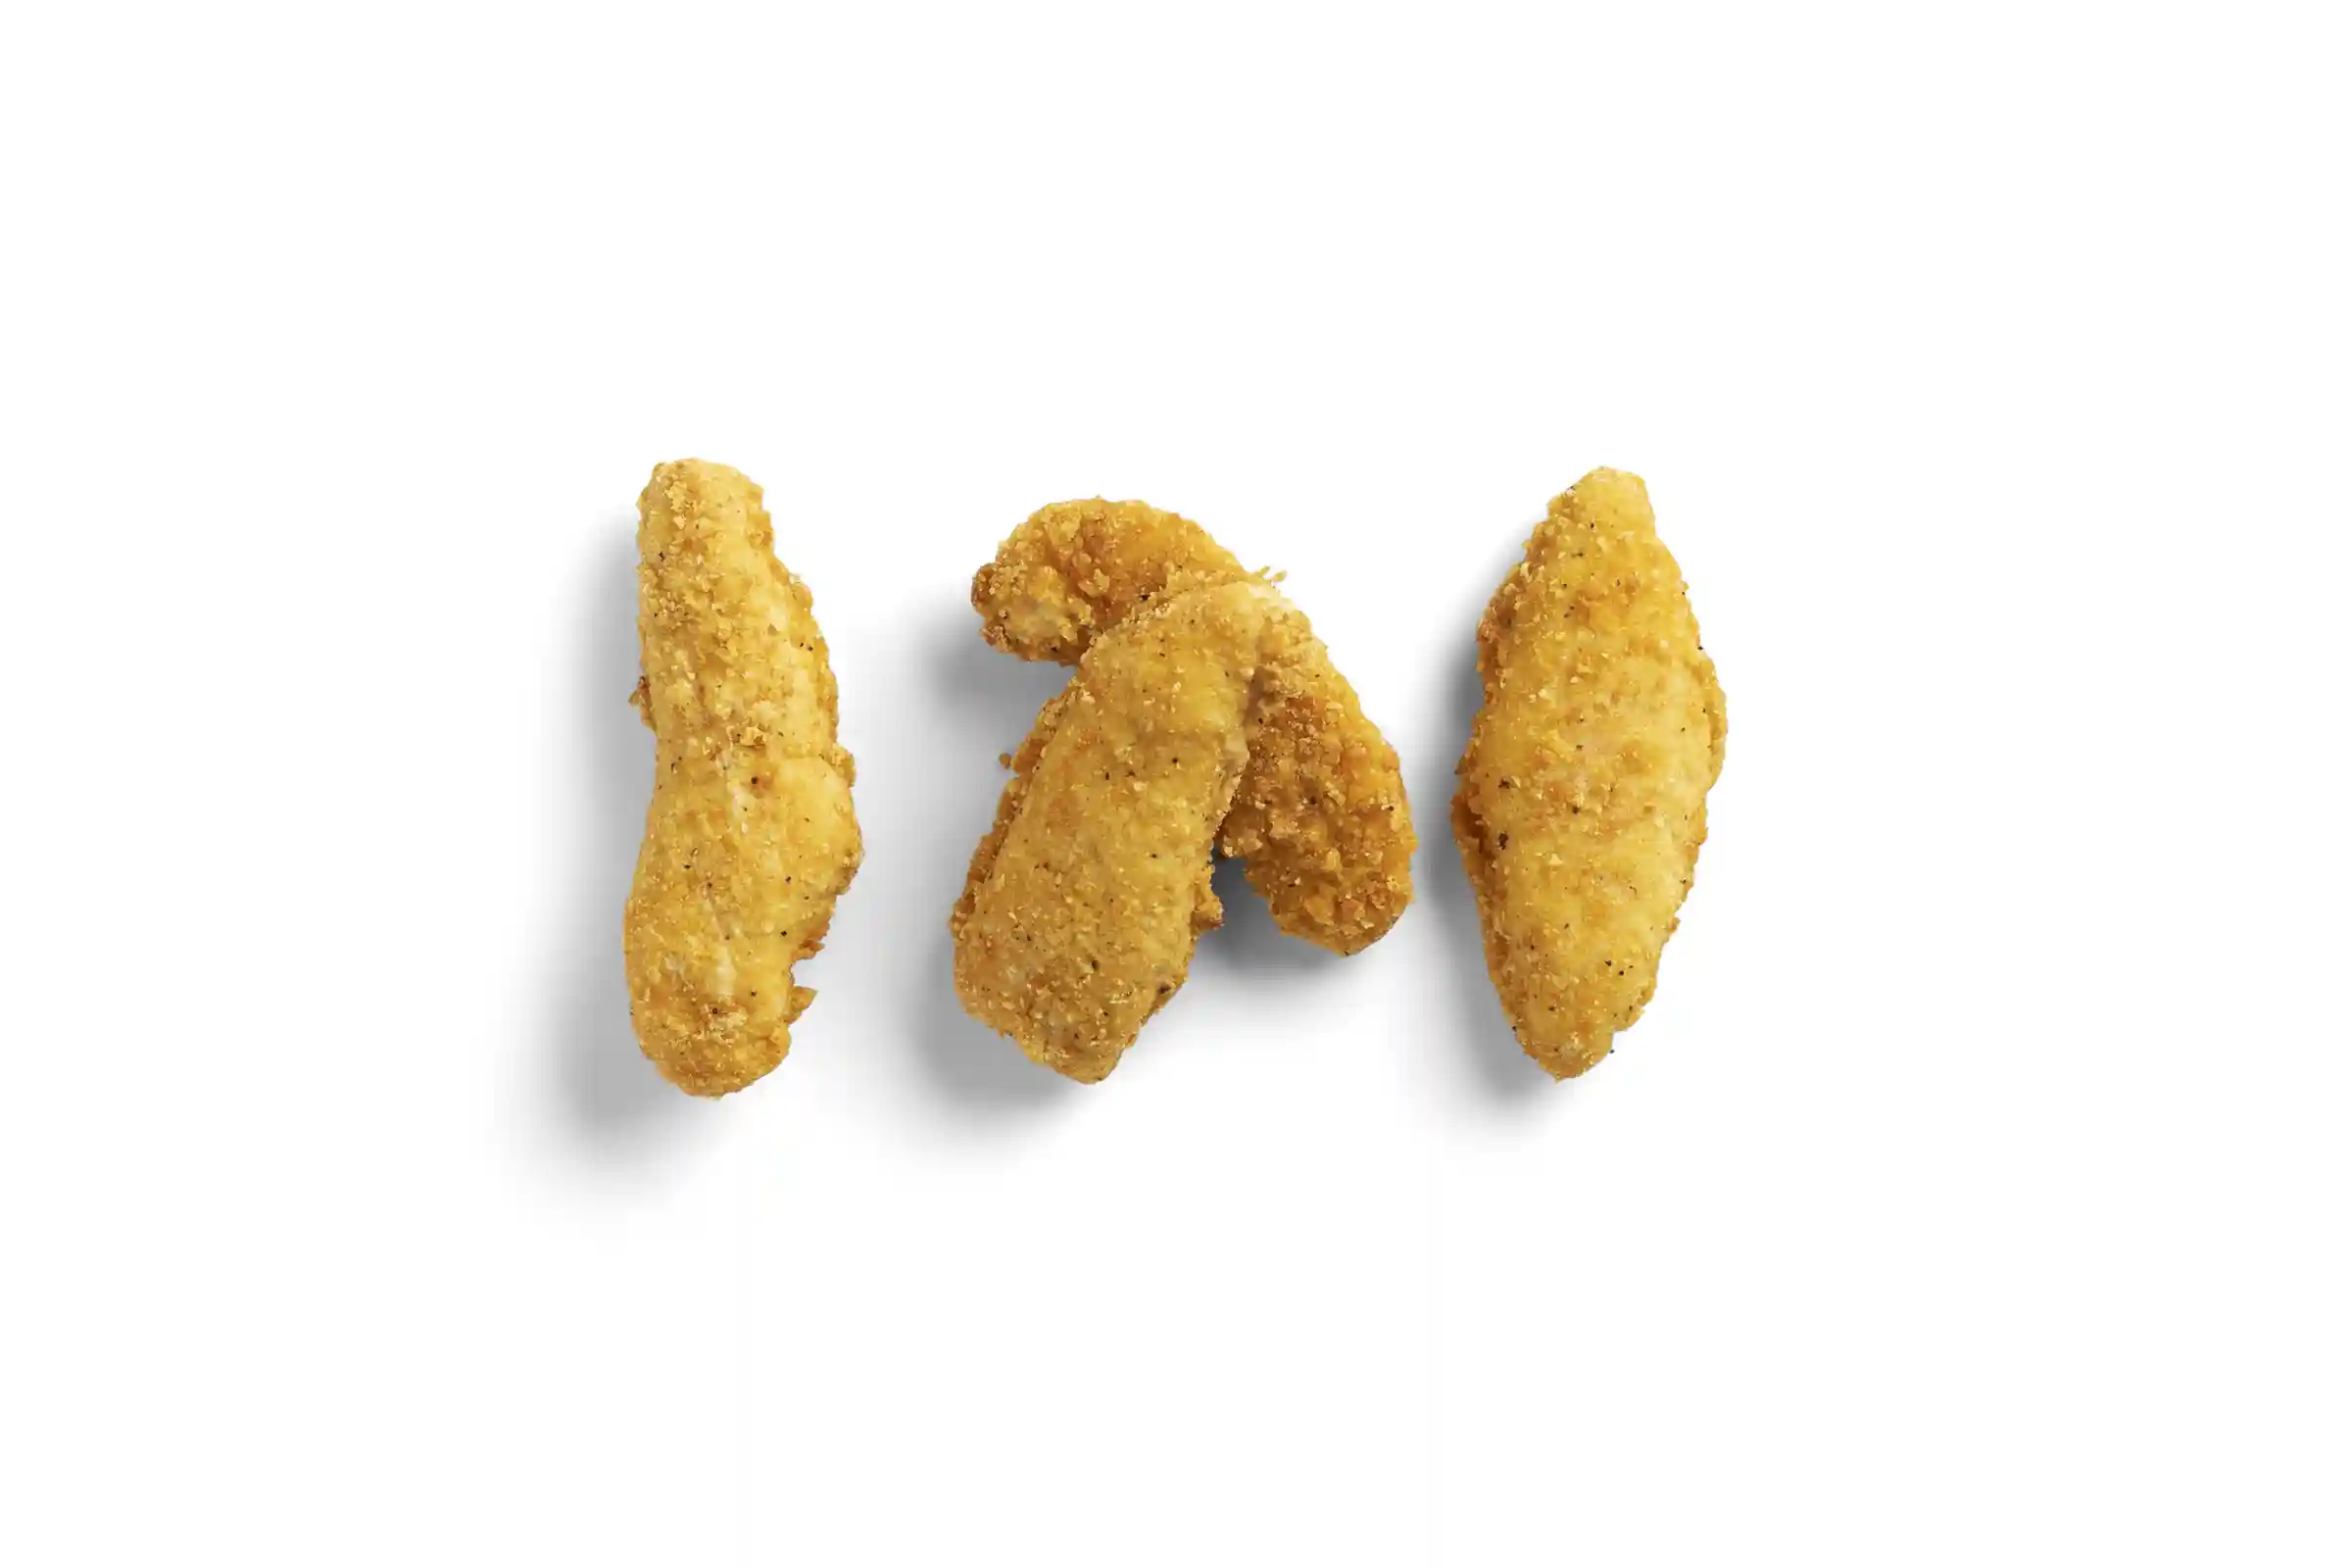 Tyson® Fully Cooked Whole Grain Breaded Homestyle Select Cut Chicken Breast Strips, CN 1.5 oz. _image_21